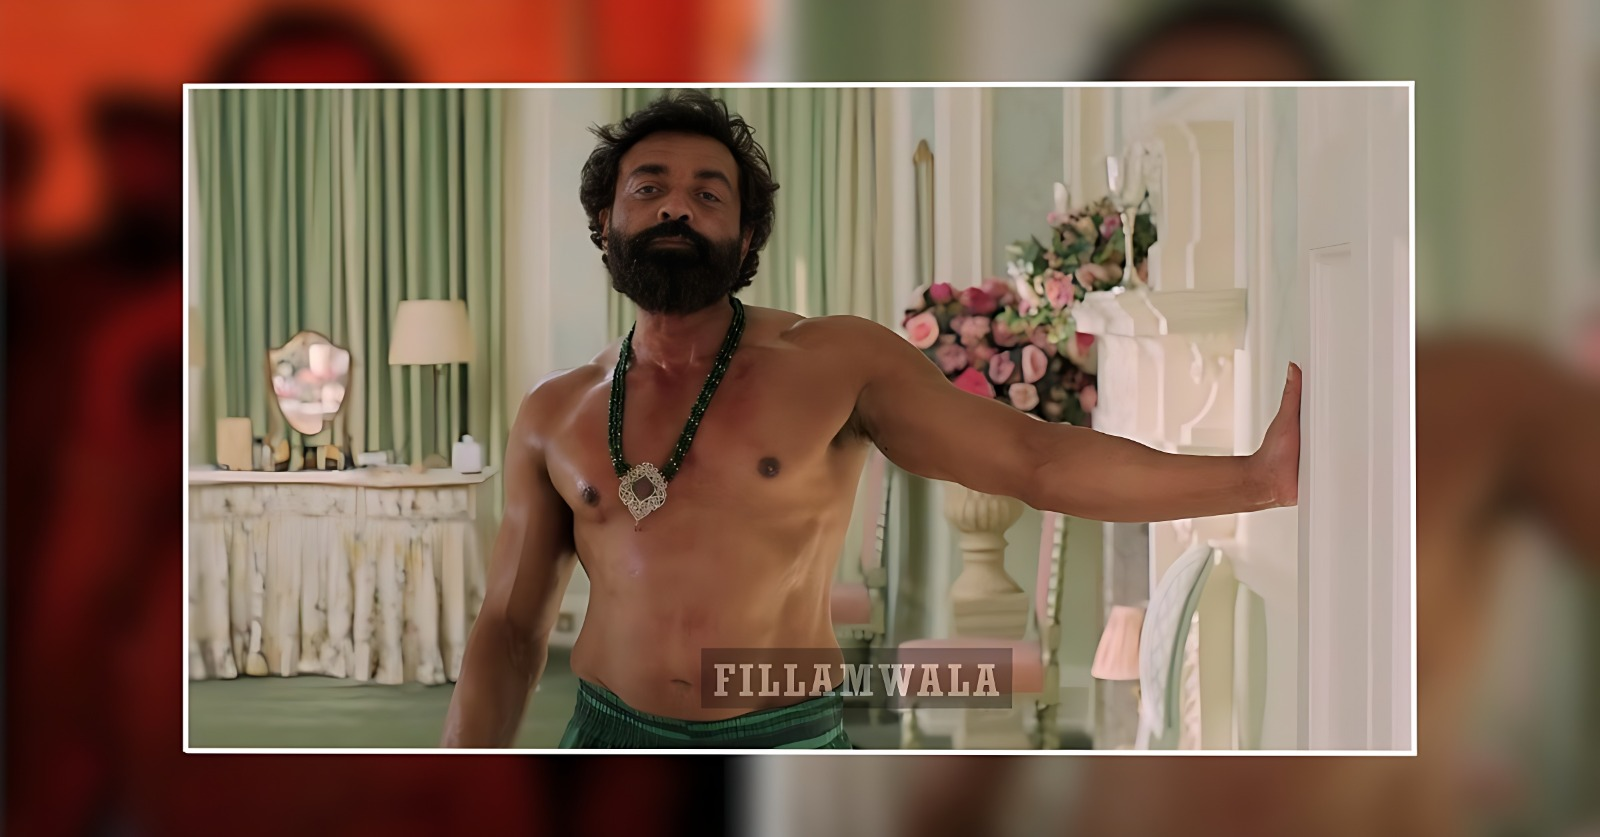 Internet Abuzz Over Bobby Deol's Impactful Appearance in 'Animal' Teaser